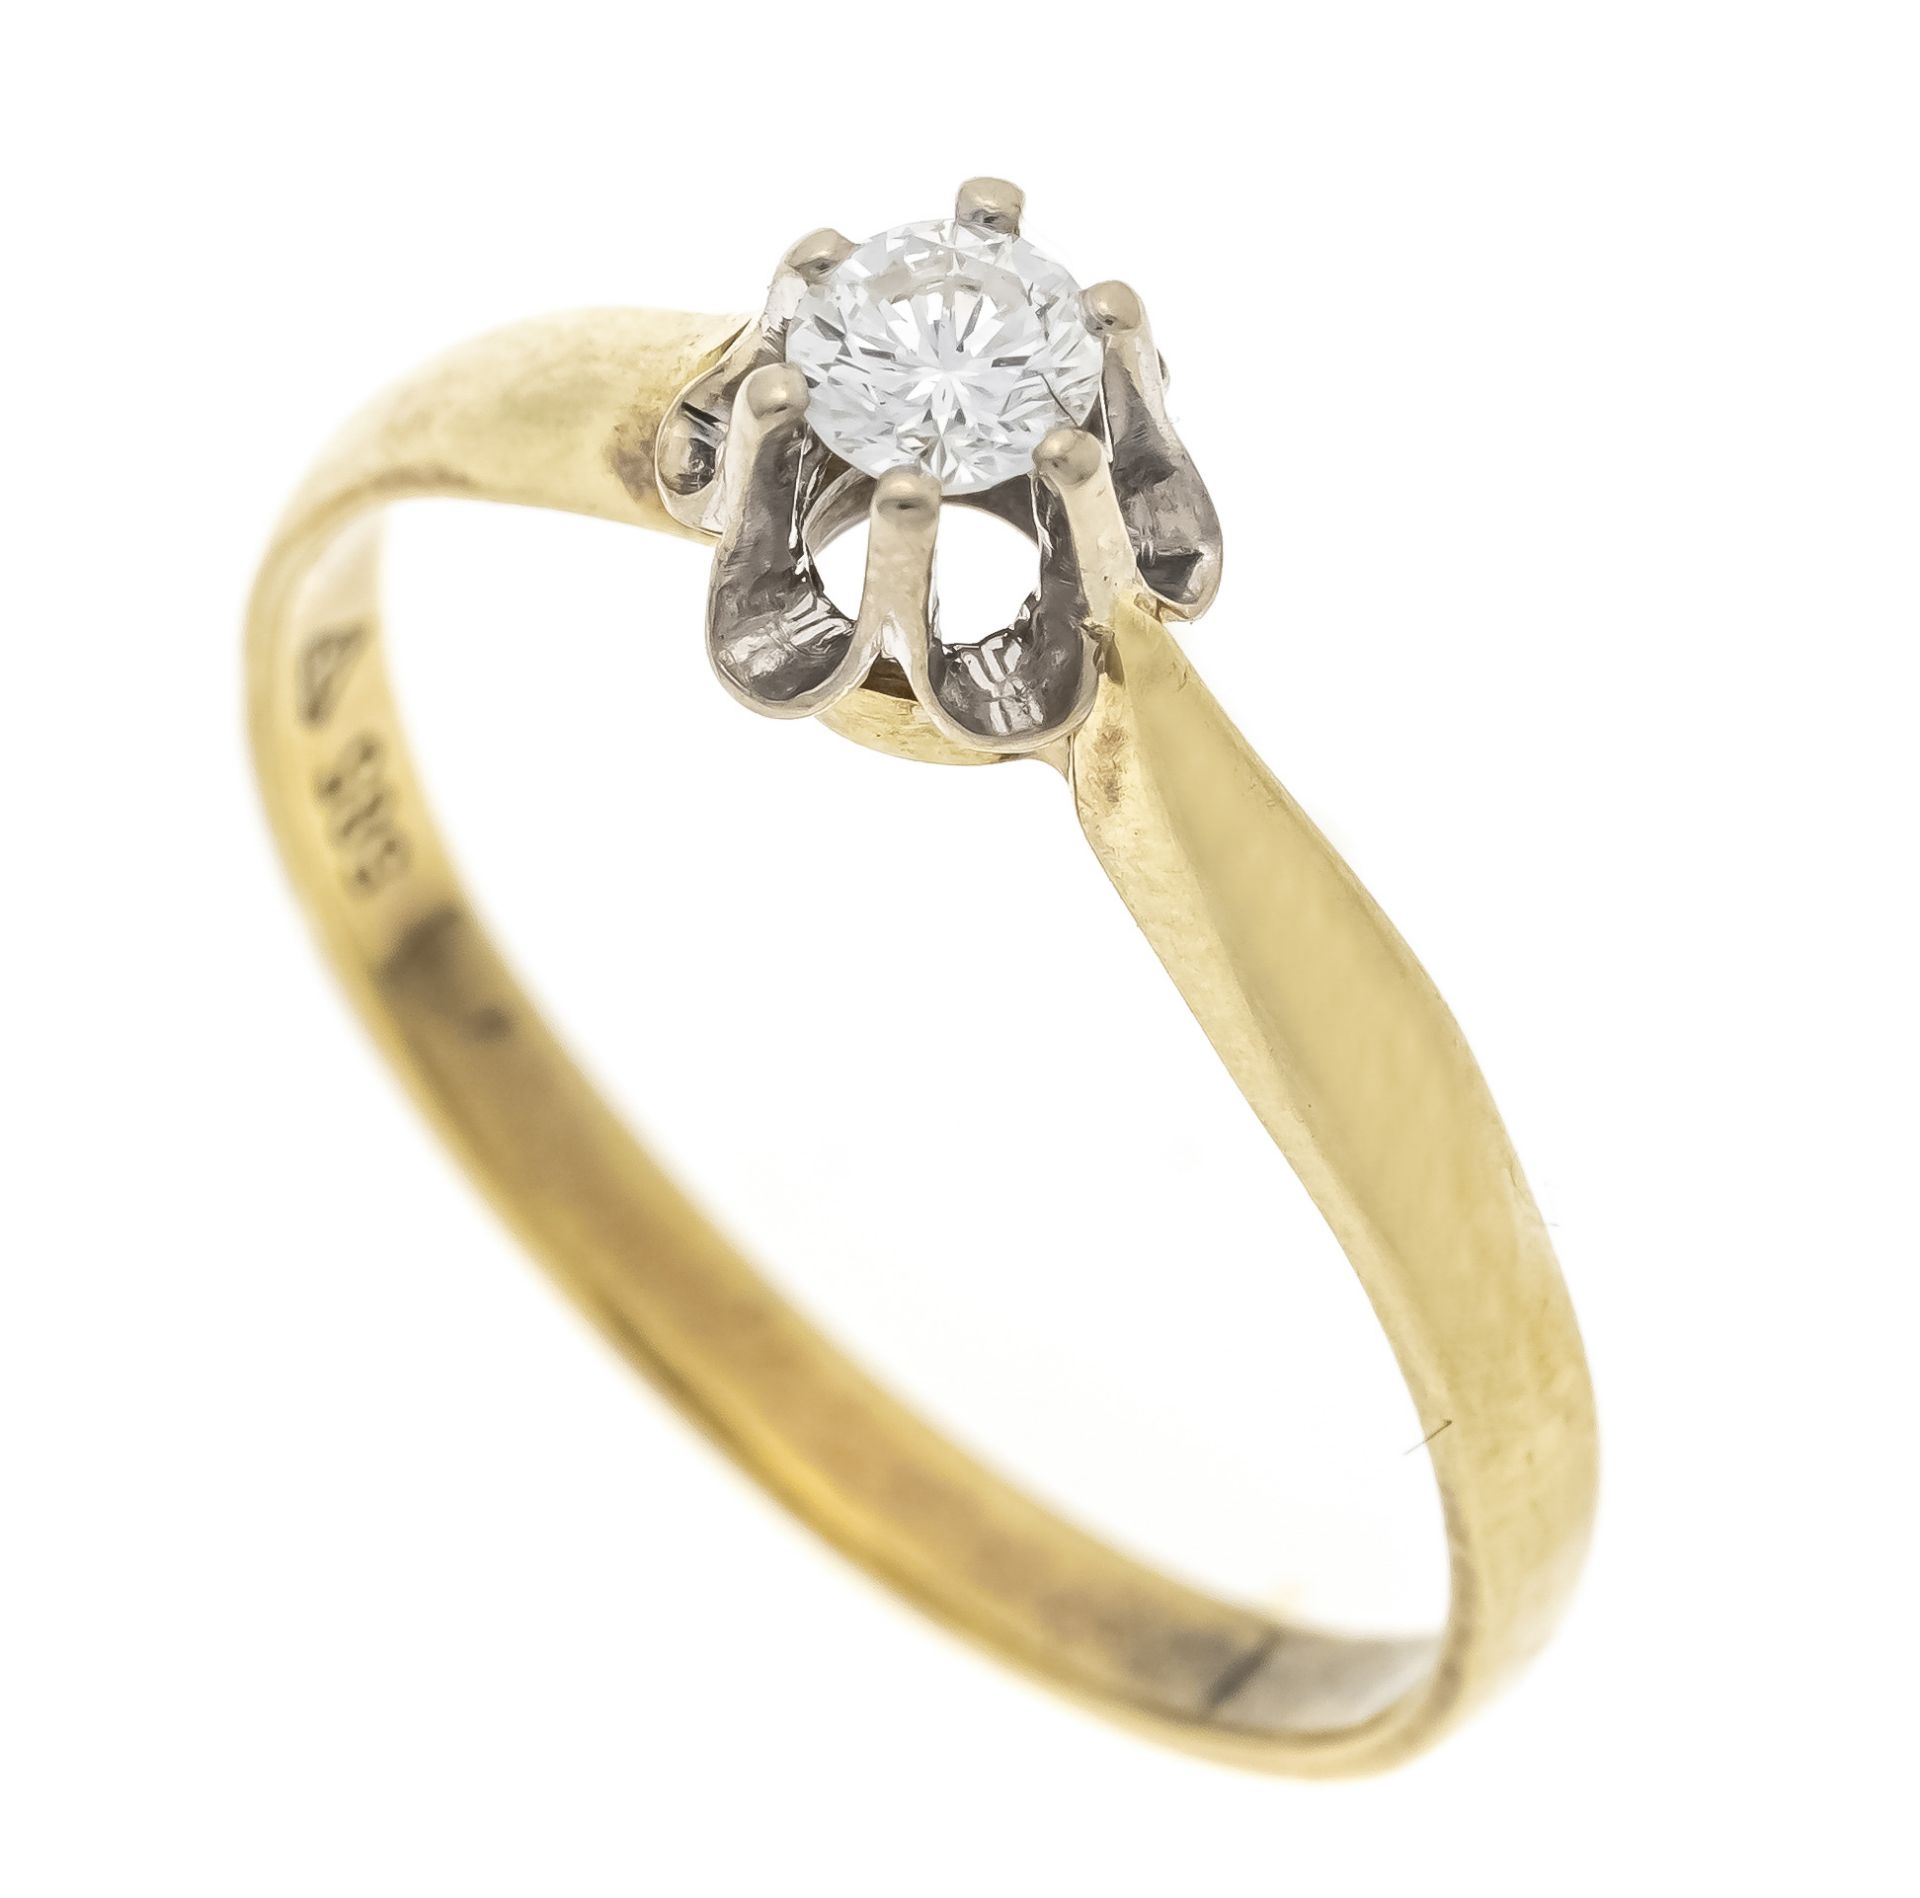 Brilliant solitaire ring GG/WG 585/000 with one diamond 0,15 ct W/SI, RG 56, 2,1 g